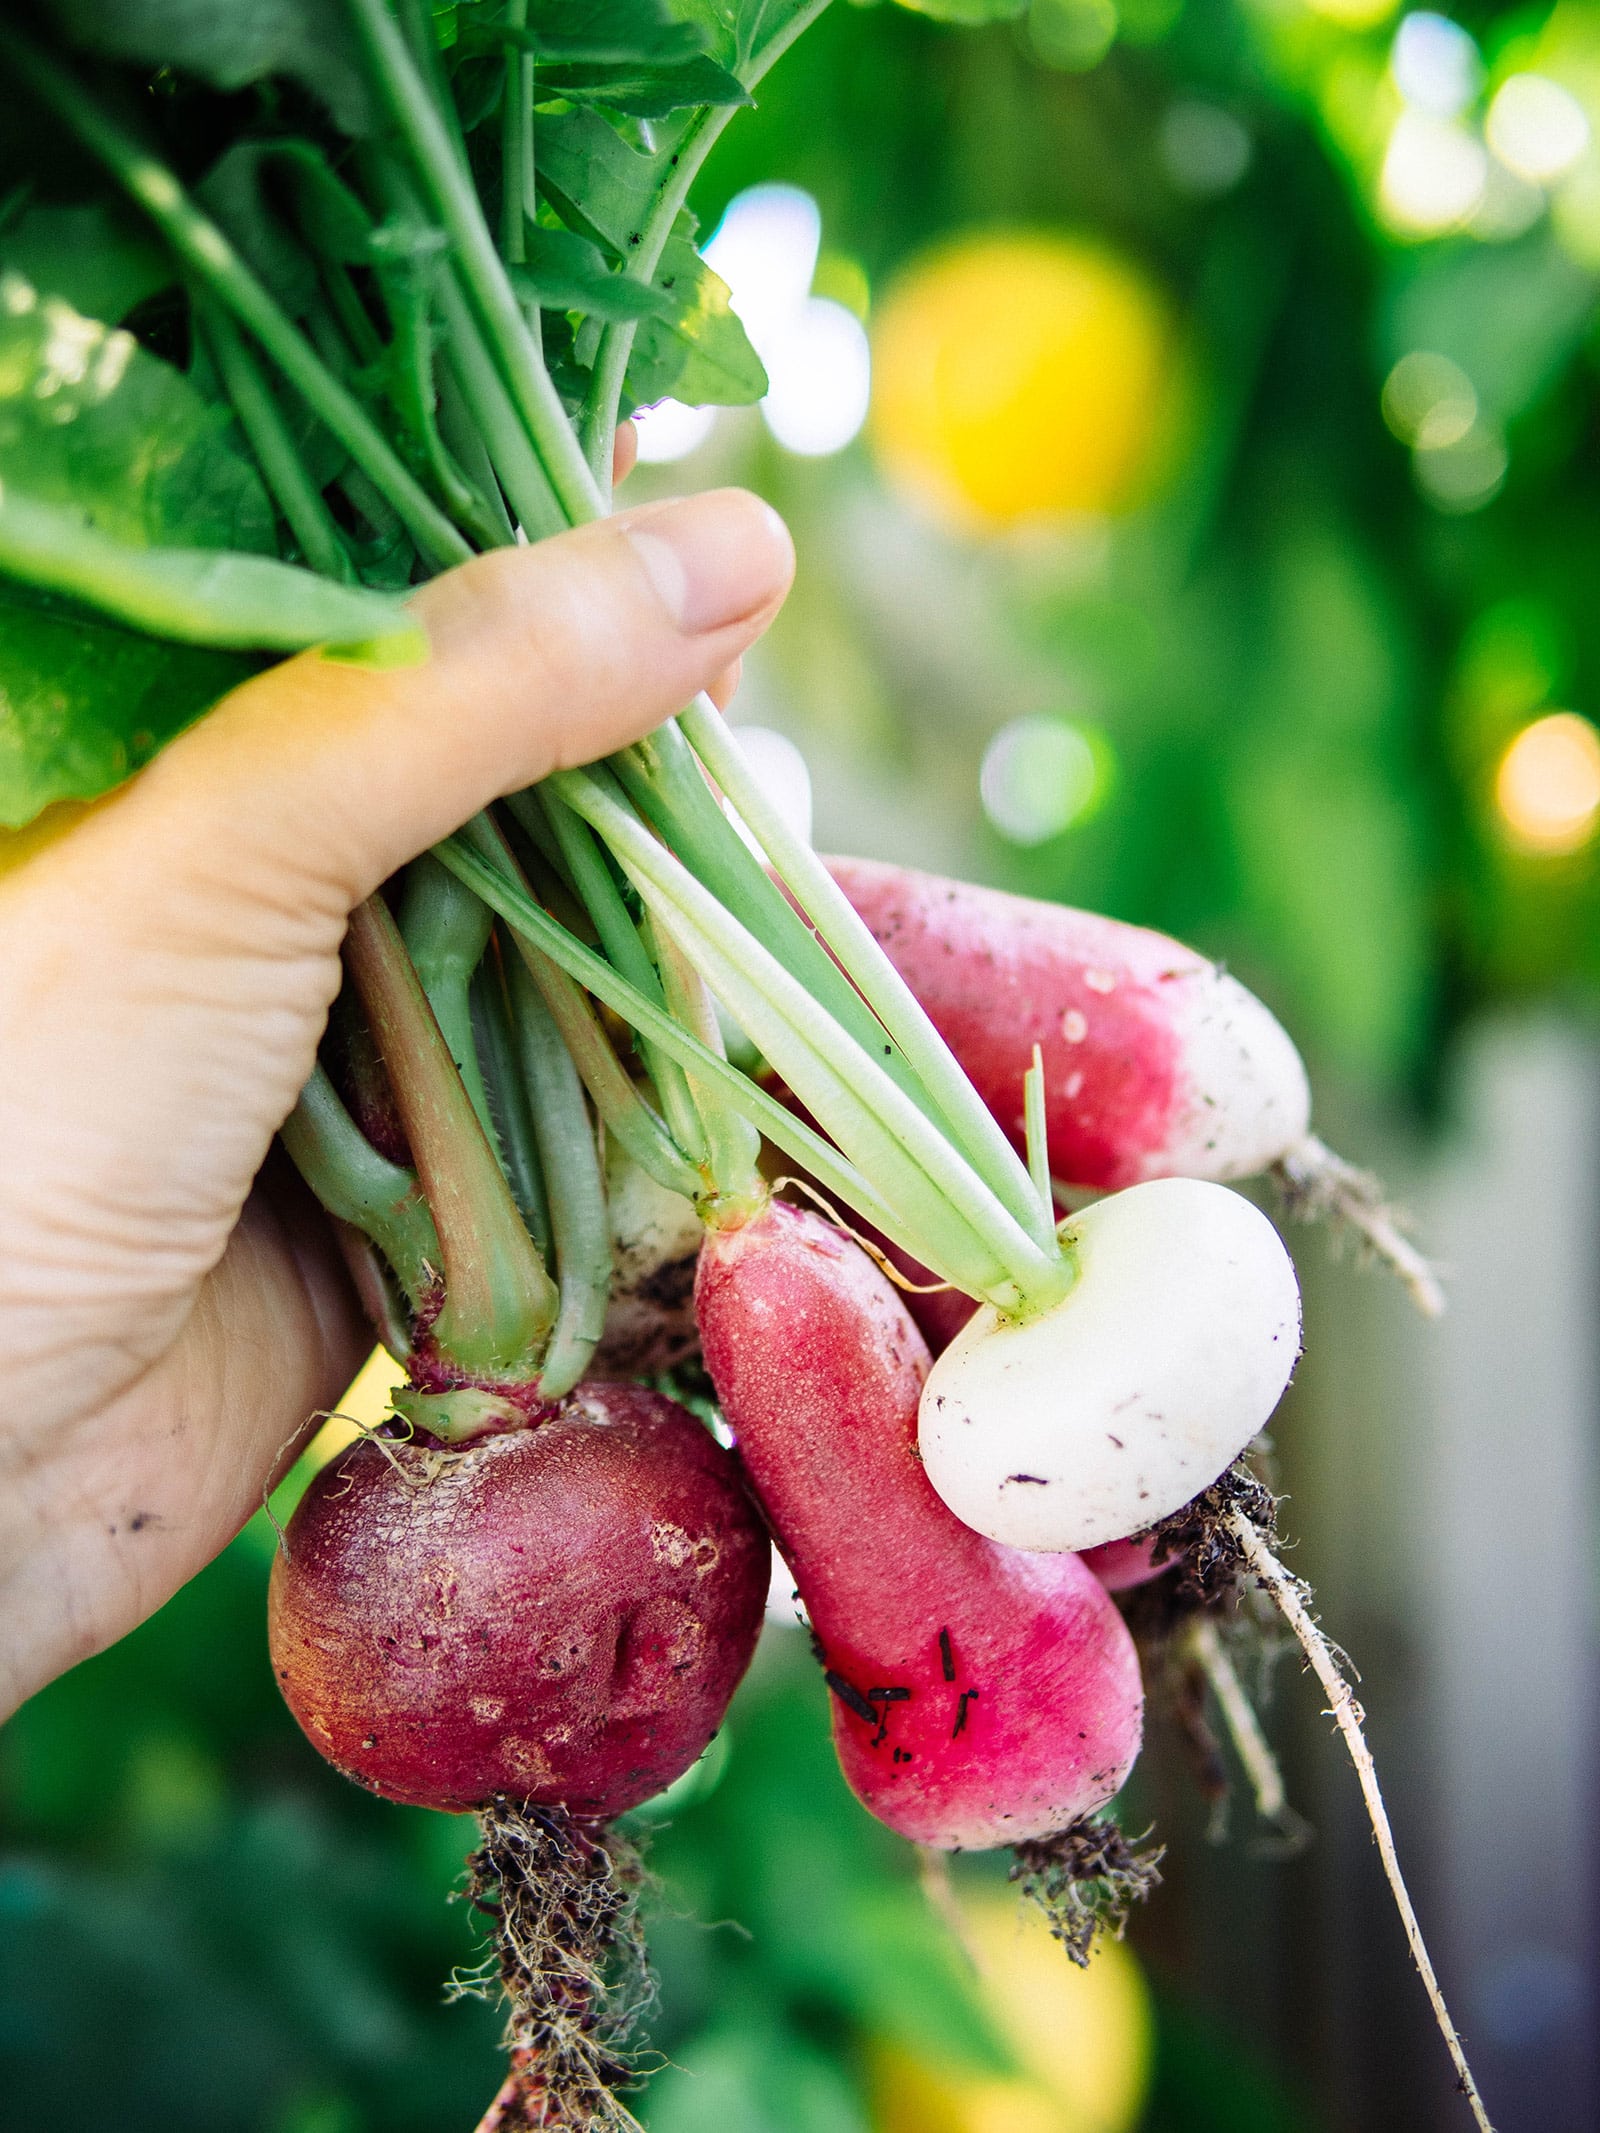 Woman's hand holding a bundle of different colored spring radishes including Crimson Giant, French Breakfast, and Hailstone